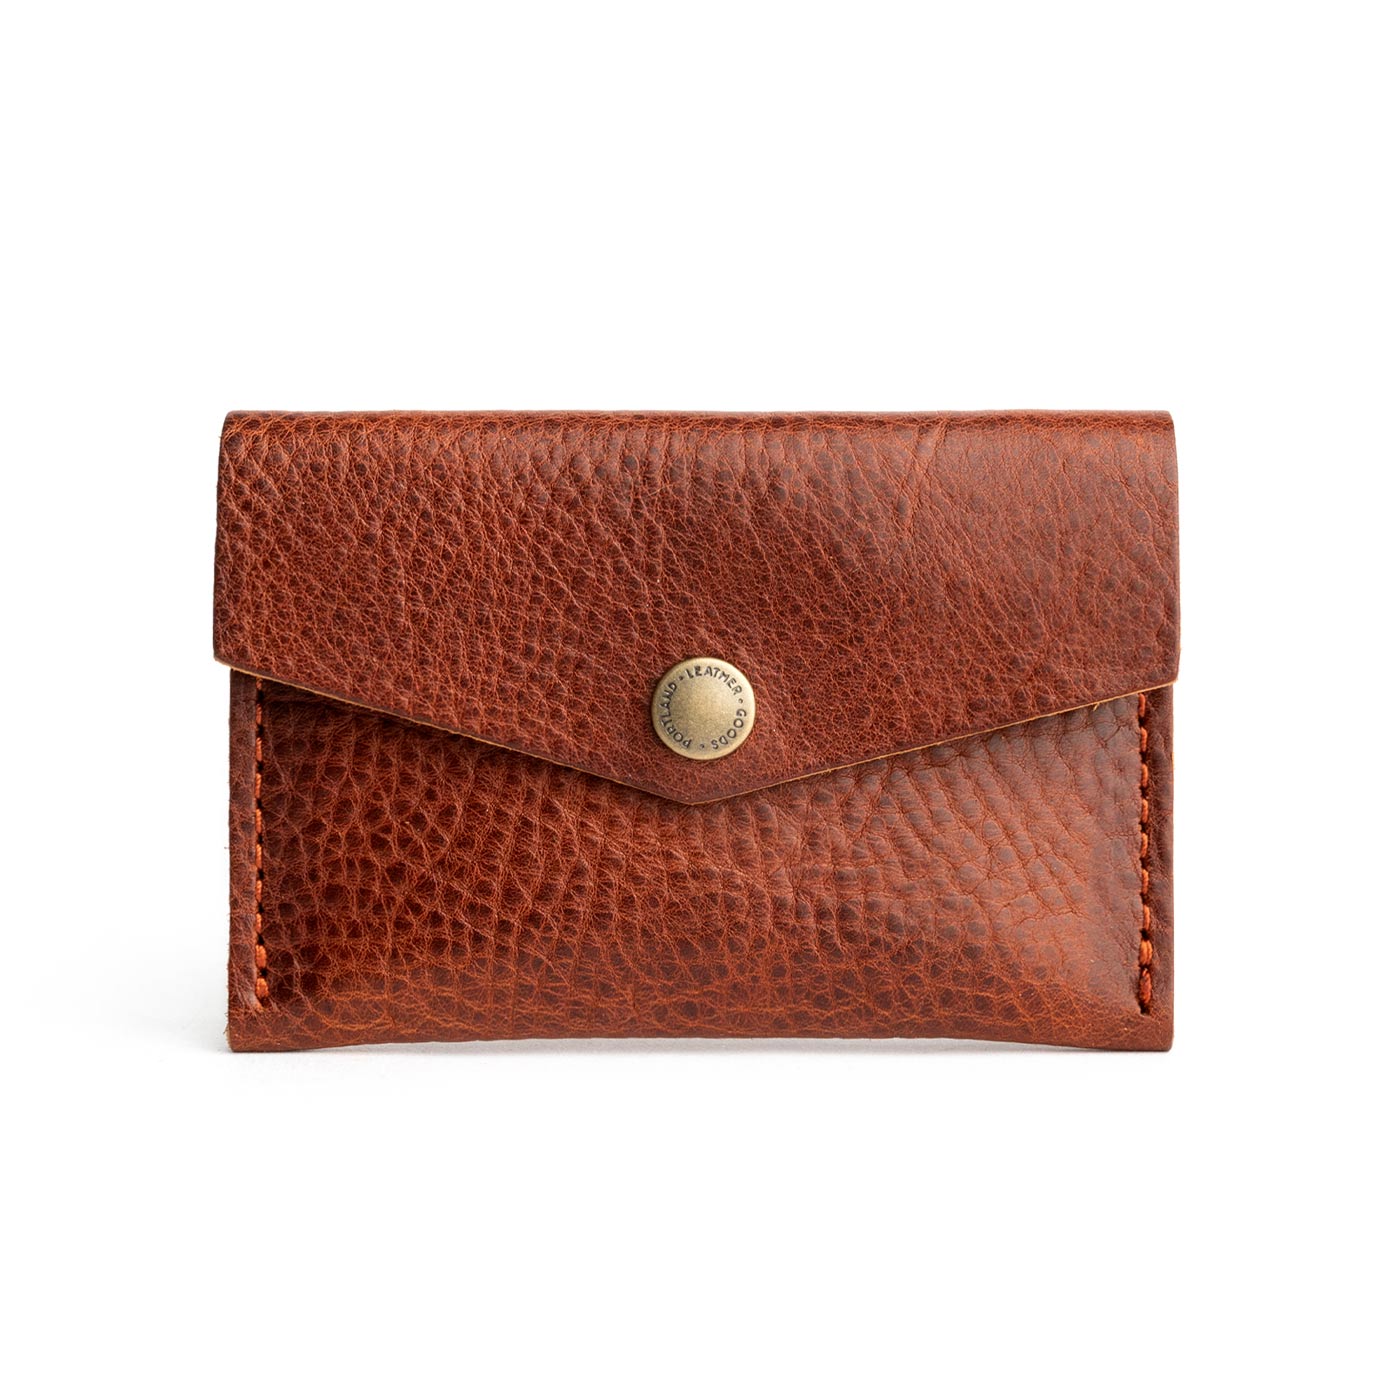 envelope compact wallet with flap